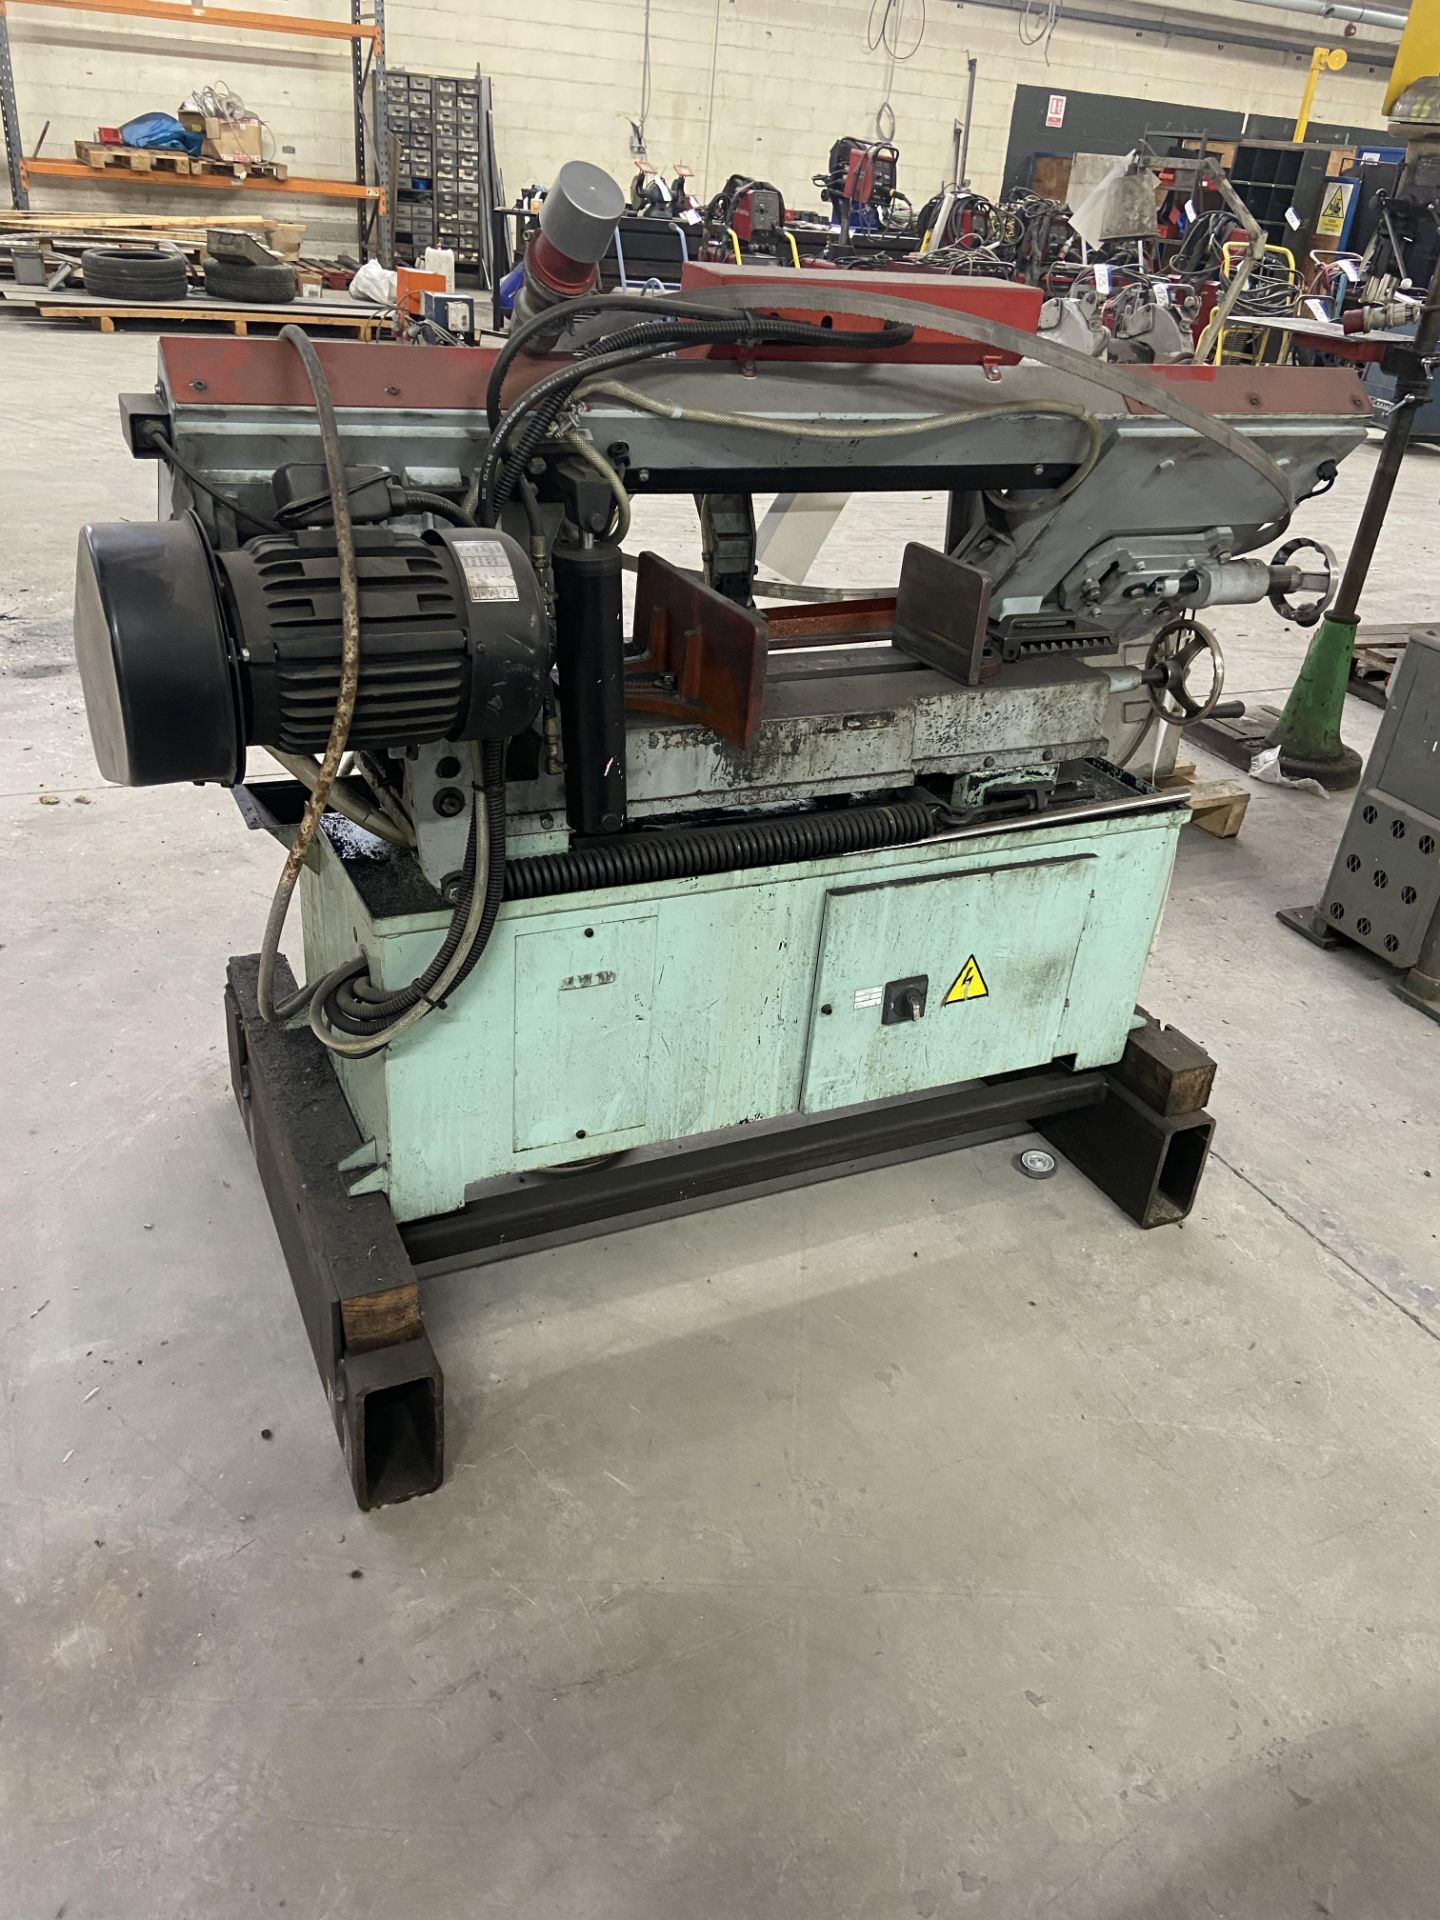 XYZ 260 Horizontal Metal Bandsaw, serial no. 18W121078.  Being sold provisionally, subject to - Image 6 of 6